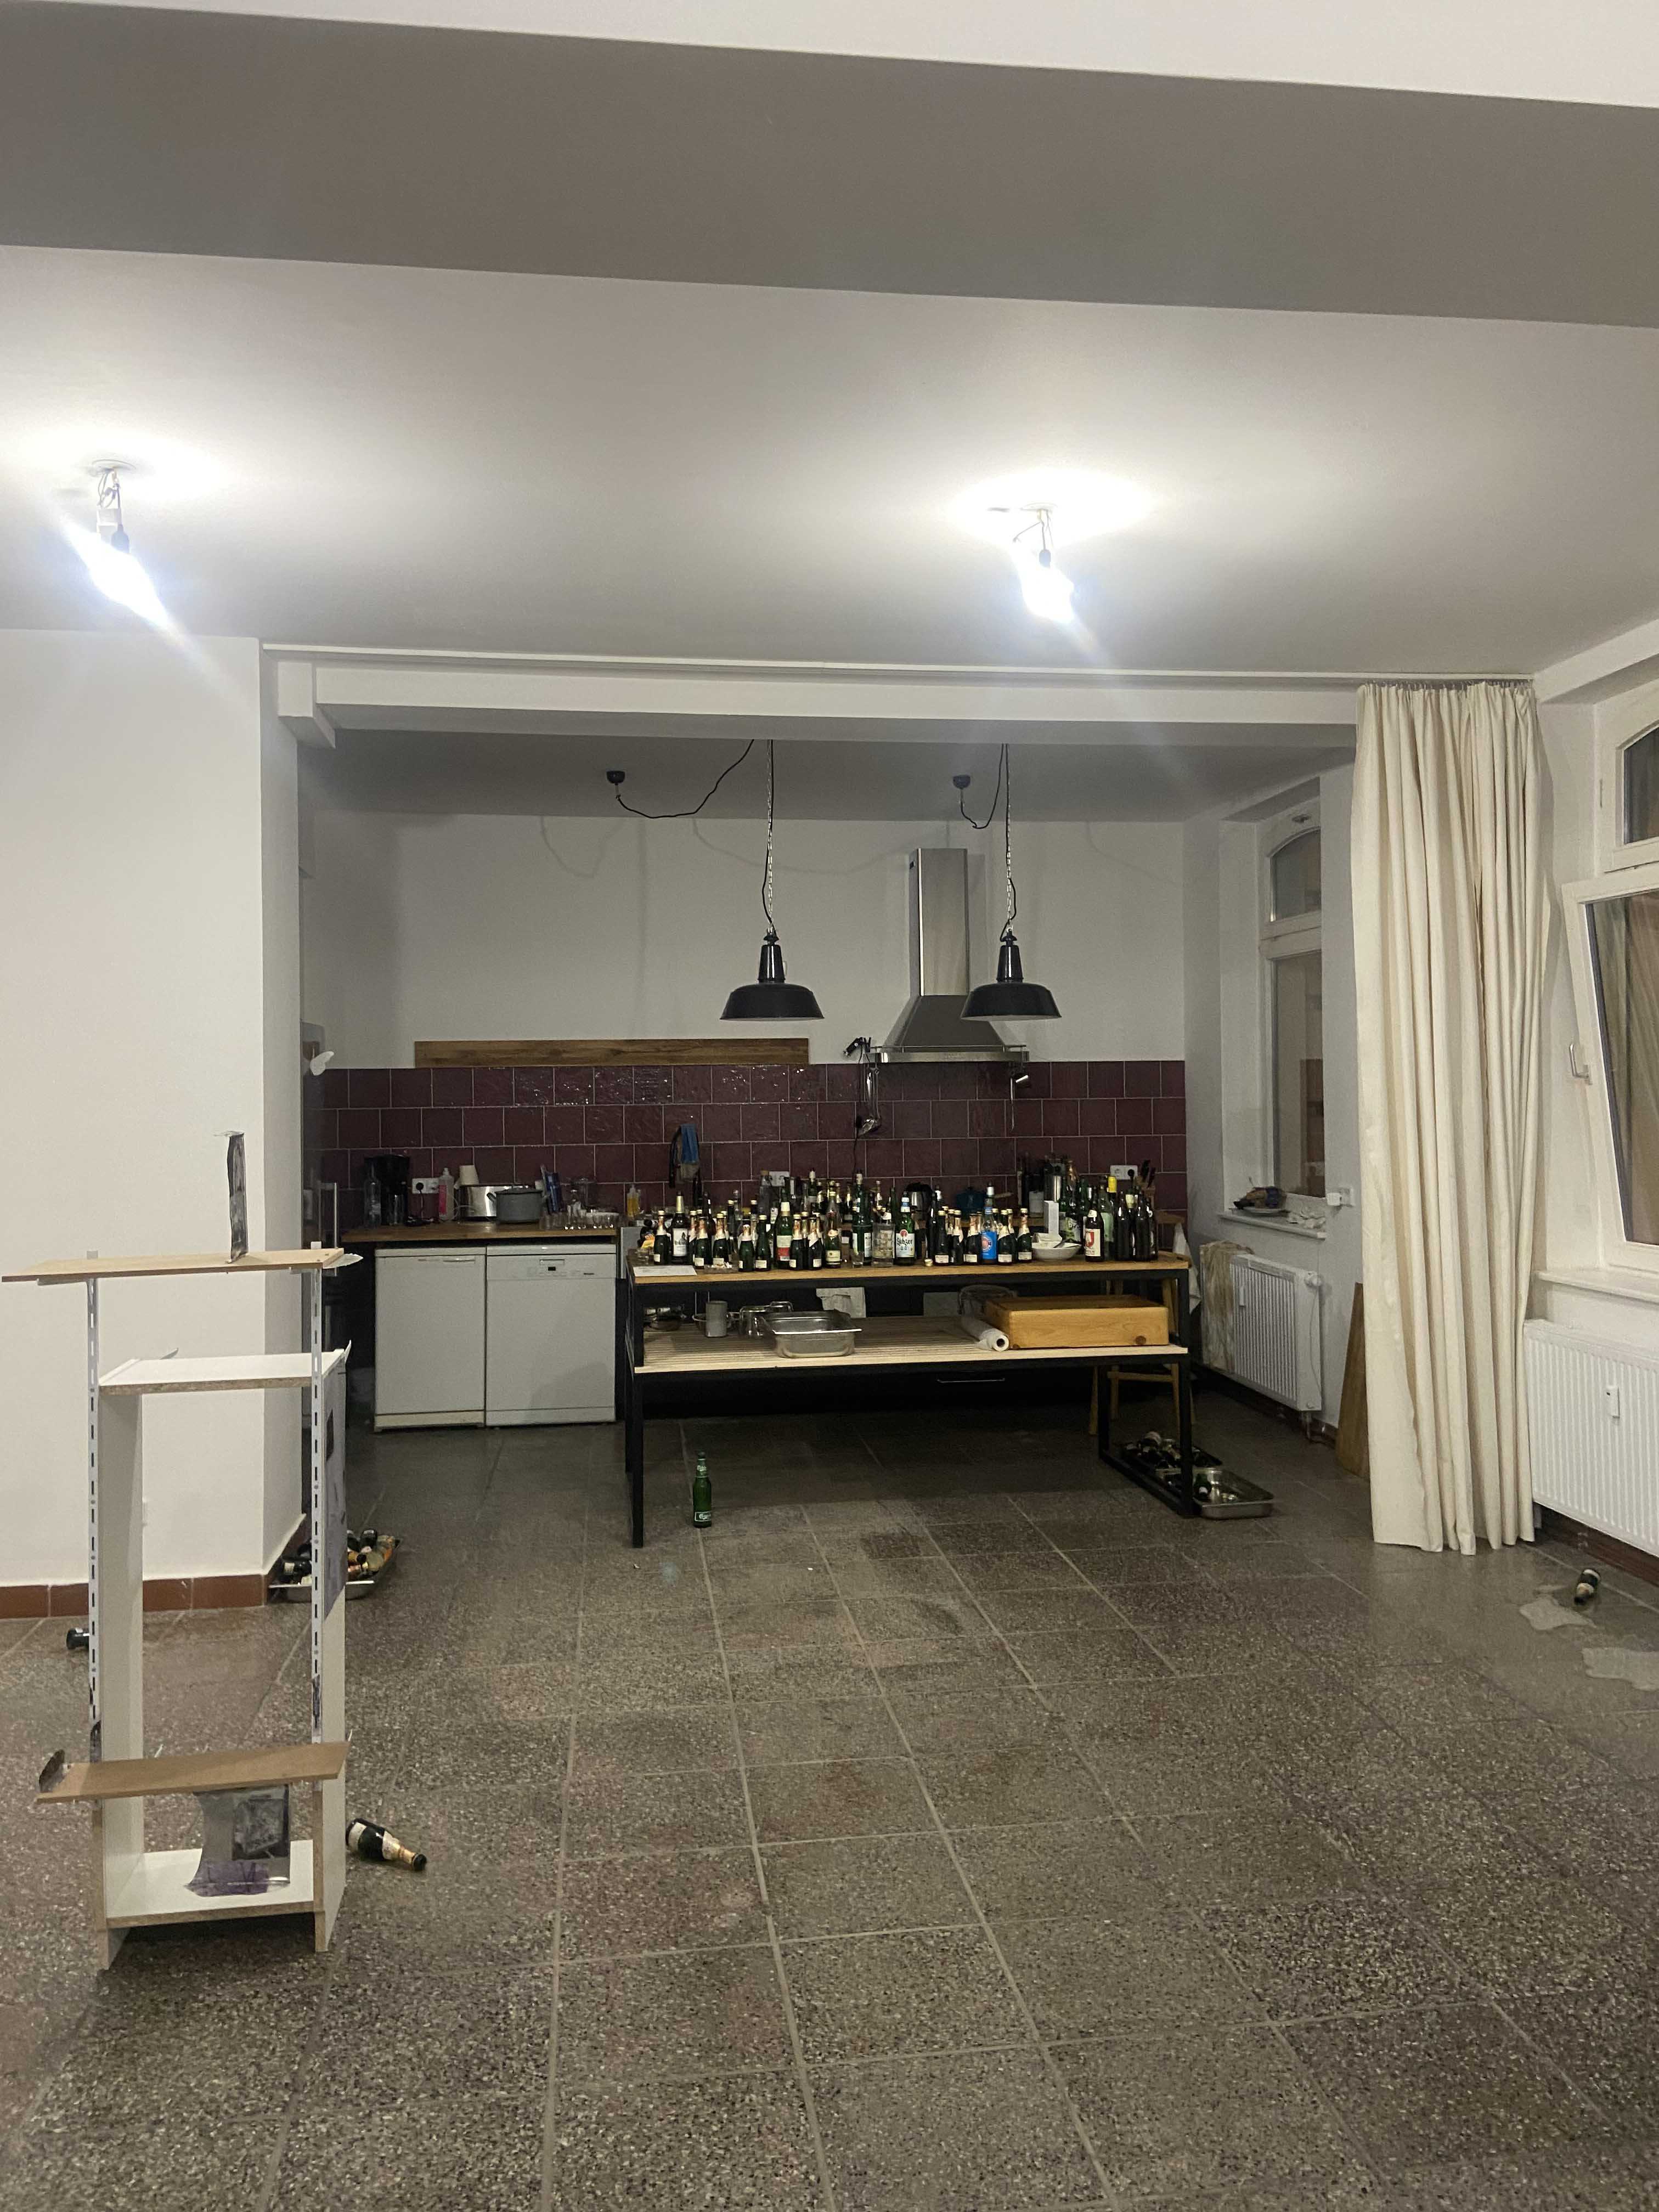 Exhibition view after the opening with the kitchen and many empty bottles of Henkell Piccolo Trocken